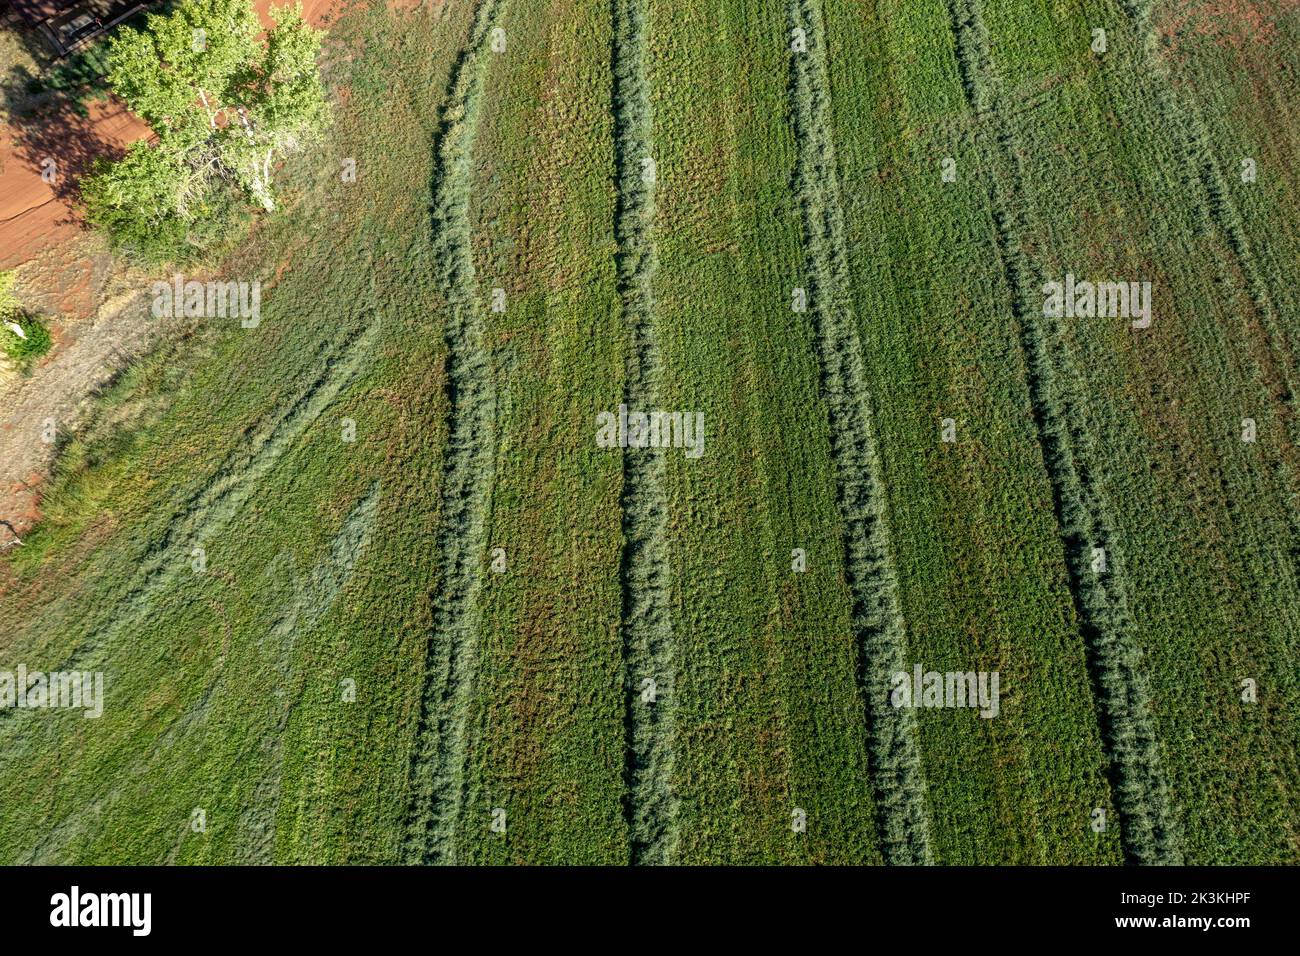 Aerial view of windrows of raked hay, ready for baling, in an alfalfa field on a ranch in the desert near Moab, Utah. Stock Photo